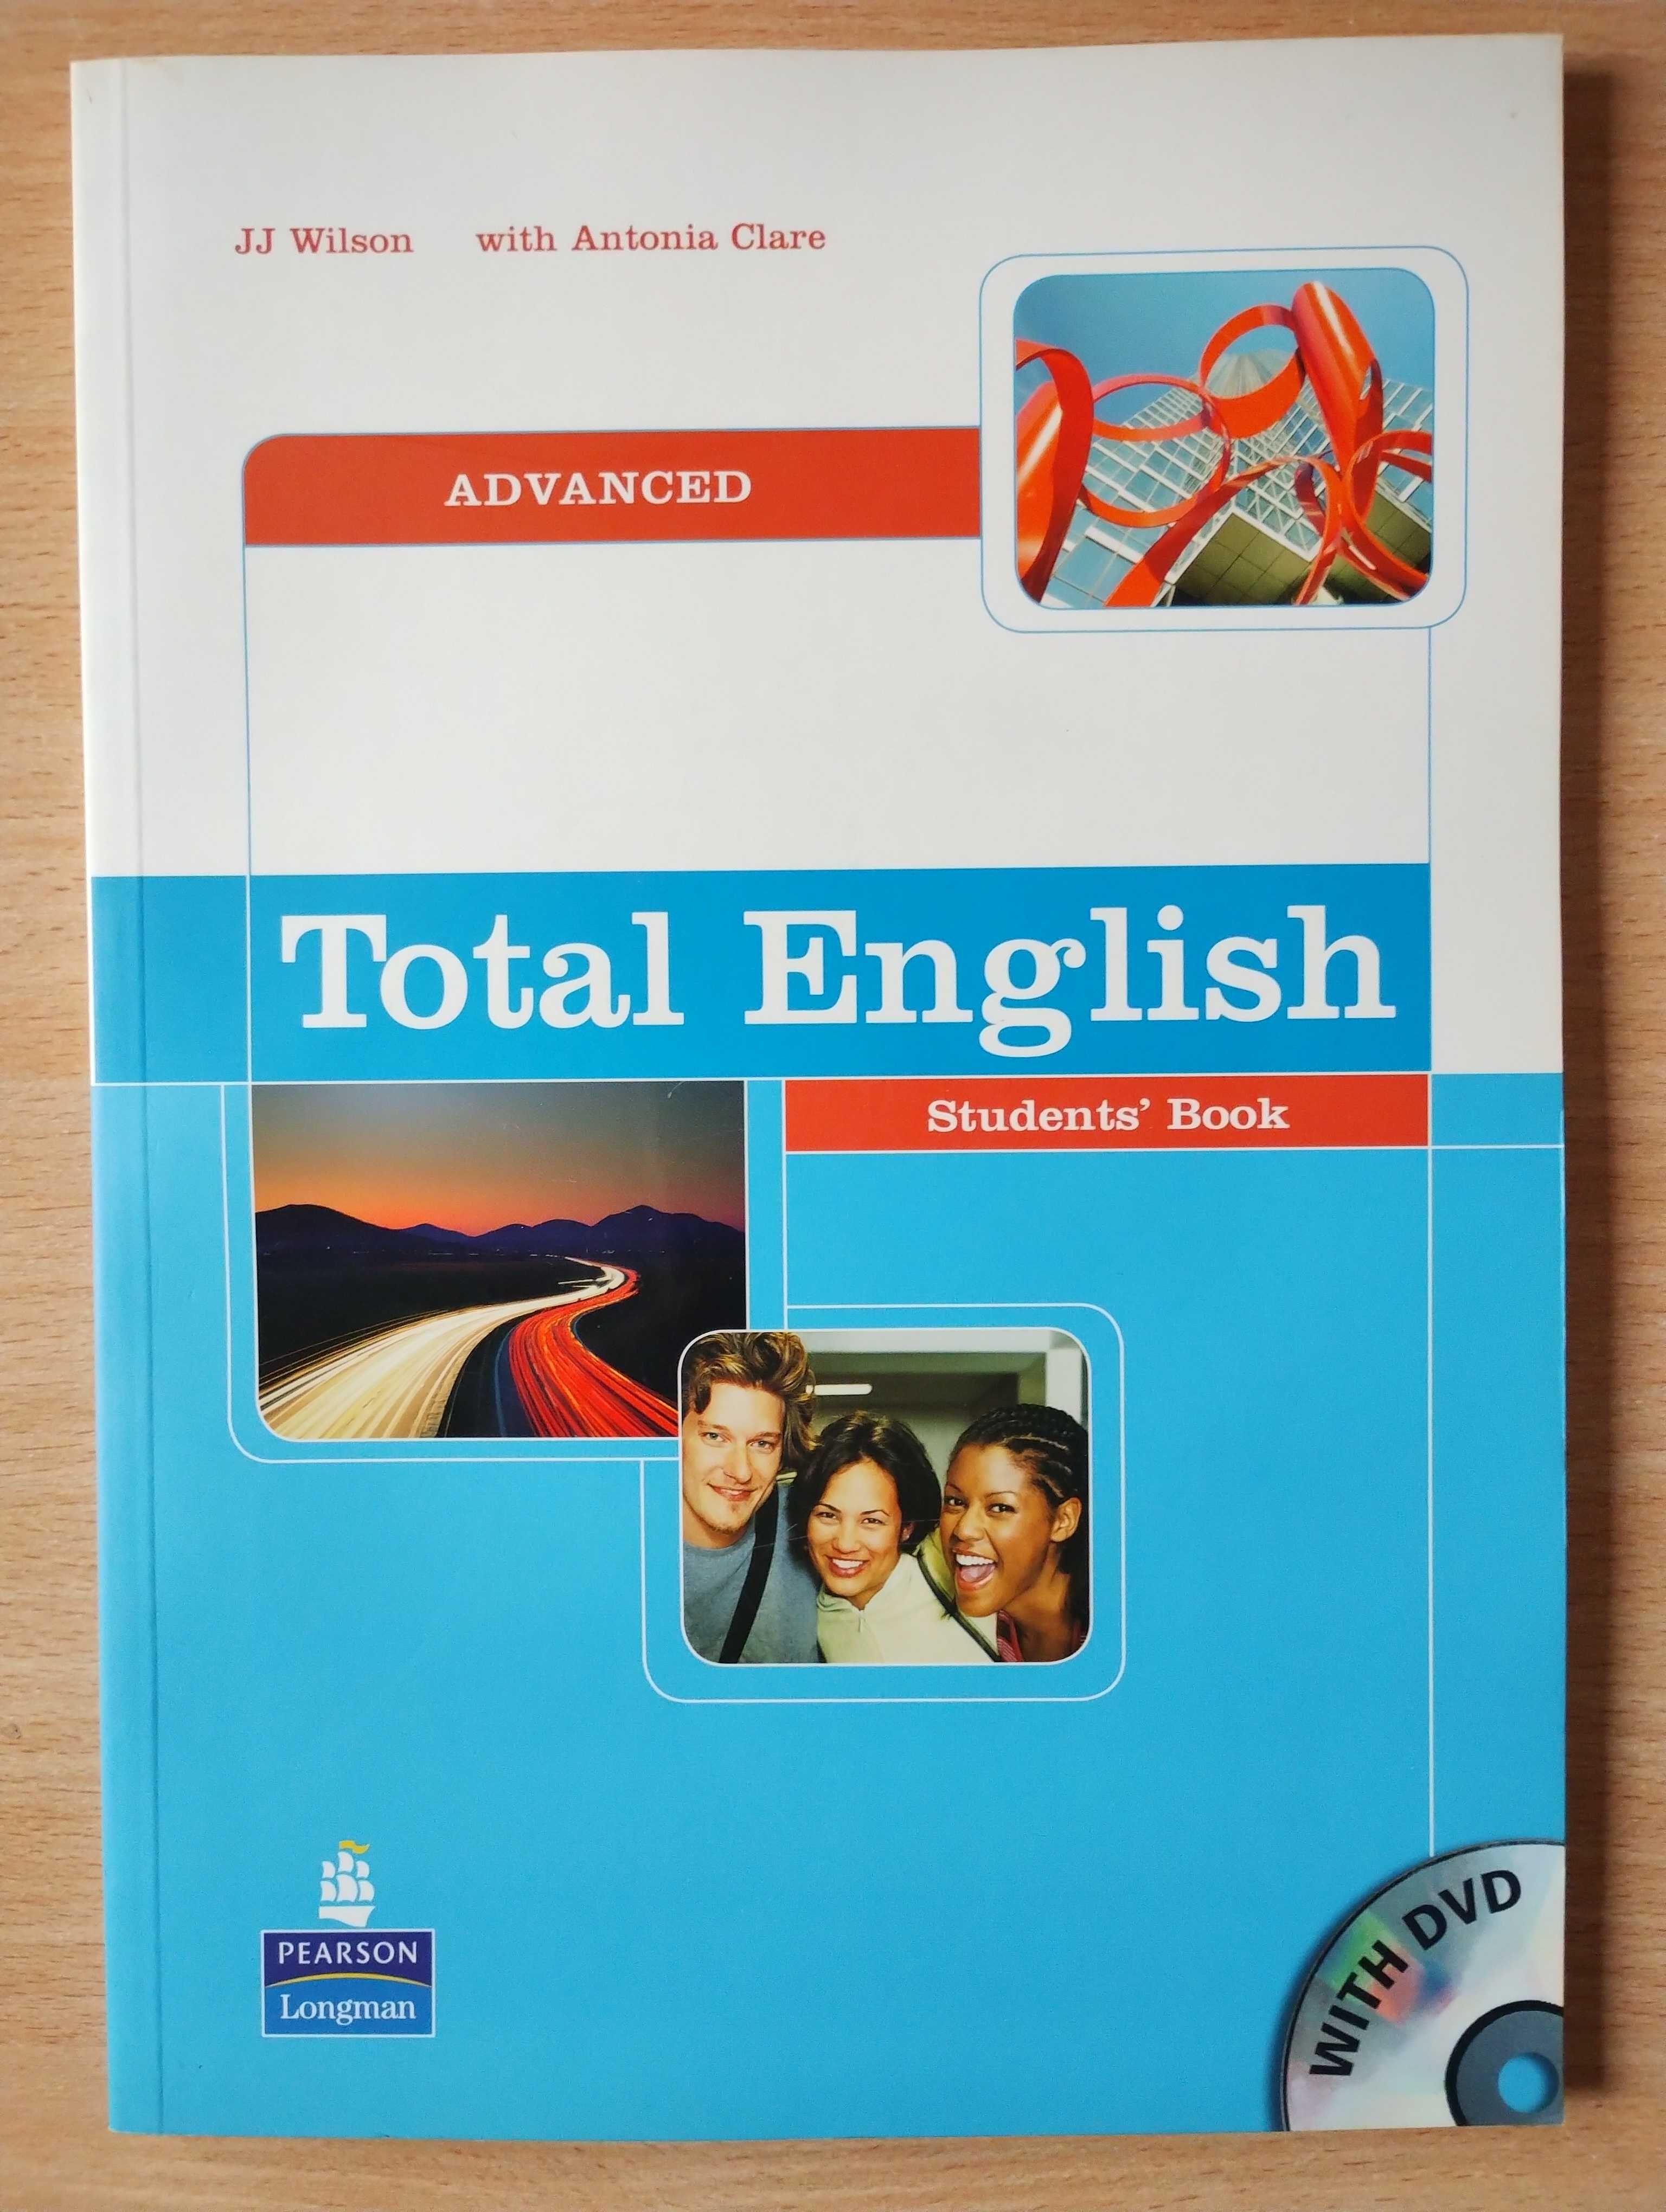 Wilson & Clare - Total English + DVD. Advanced. Students' Book.